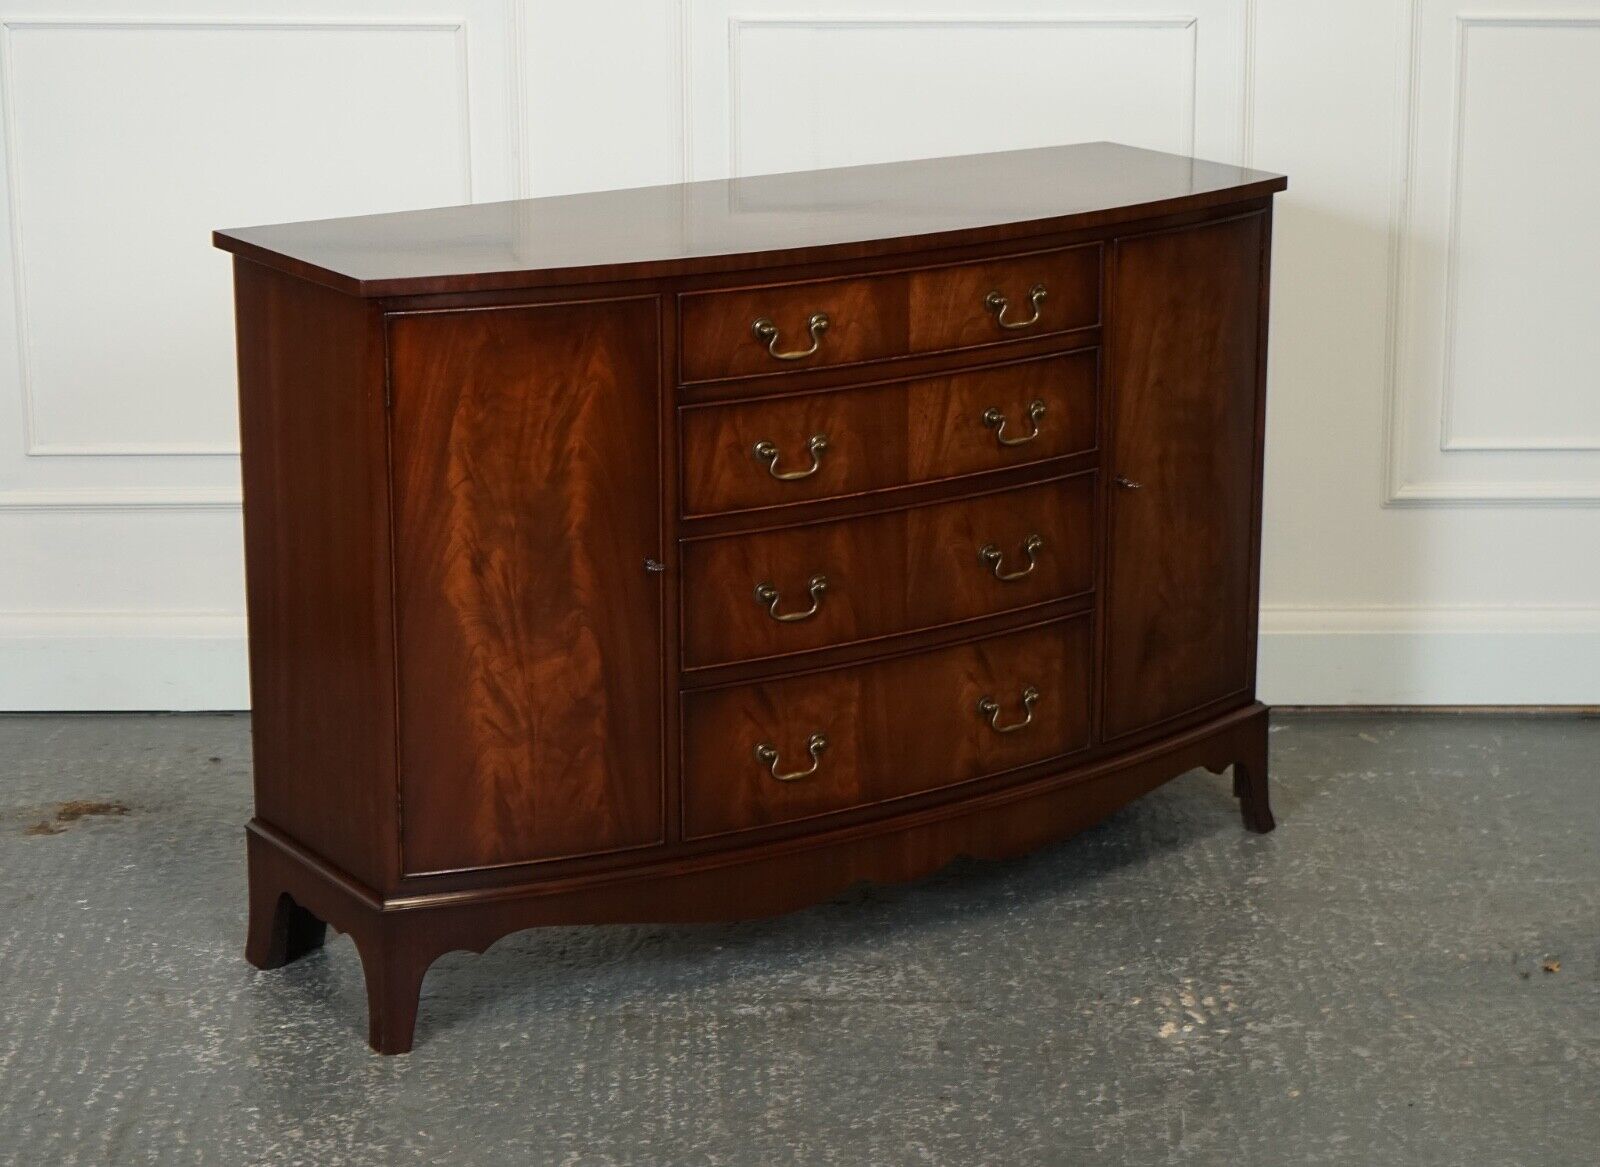 STUNNING REPRODUX BEVAN FUNNELL SIDEBOARD WITH DRAWERS J1